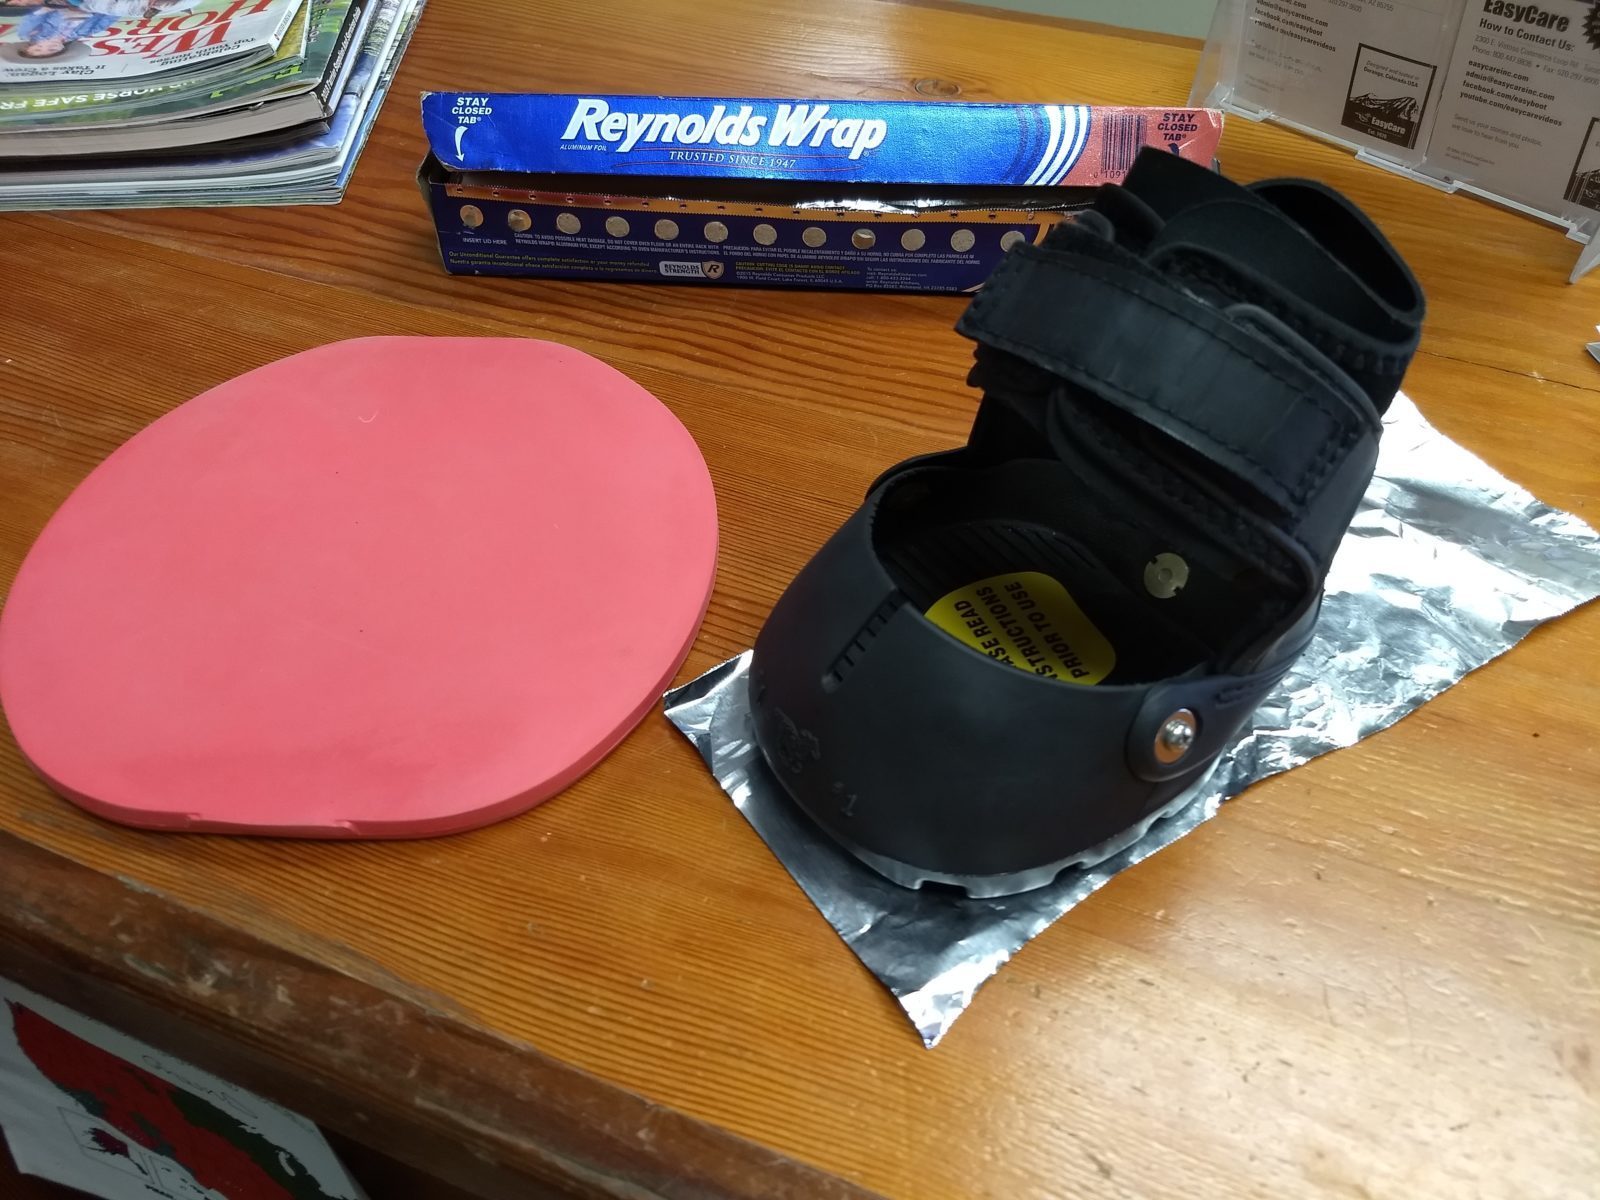 Install an EasyCare Comfort Pad 